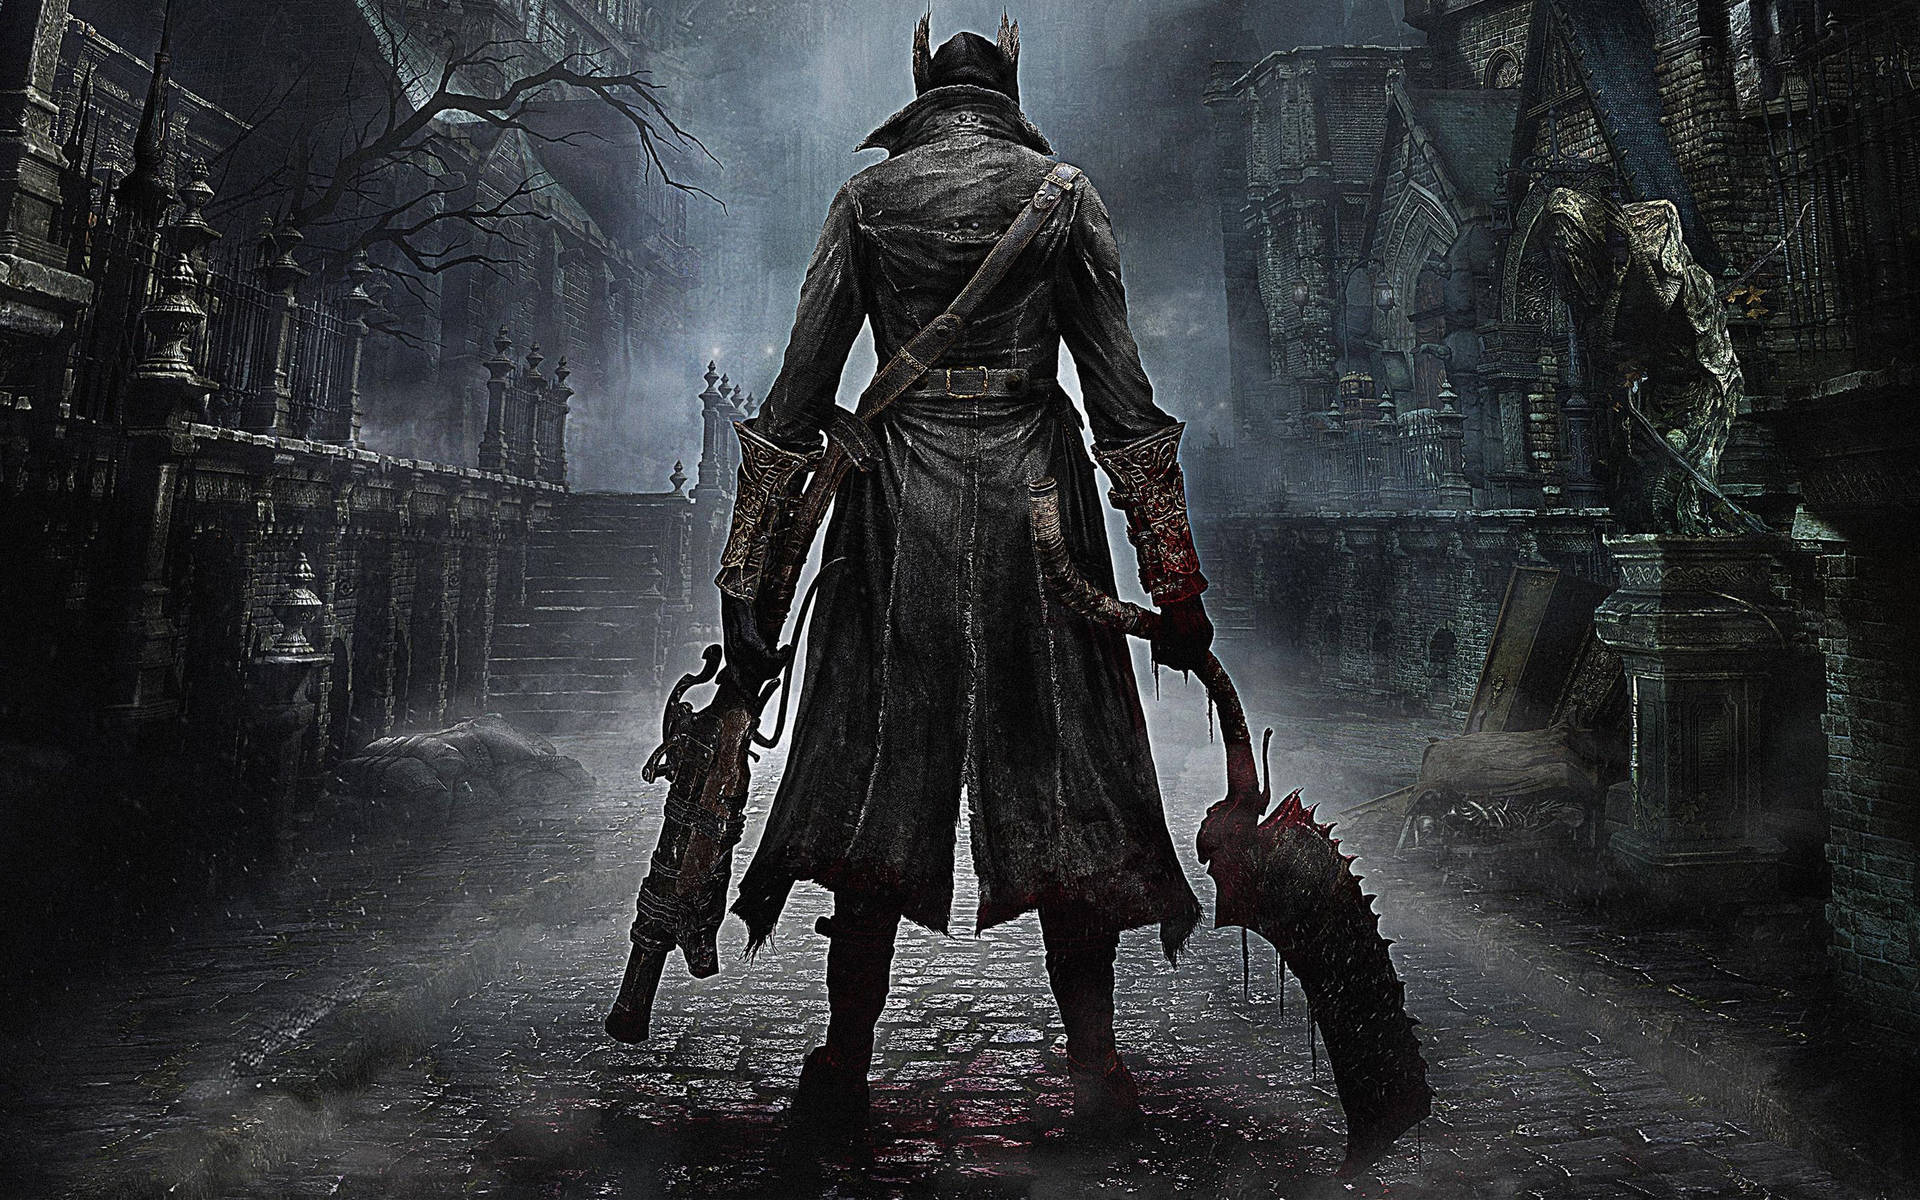 Hunter Bloodborne Action Role Playing Computer Game